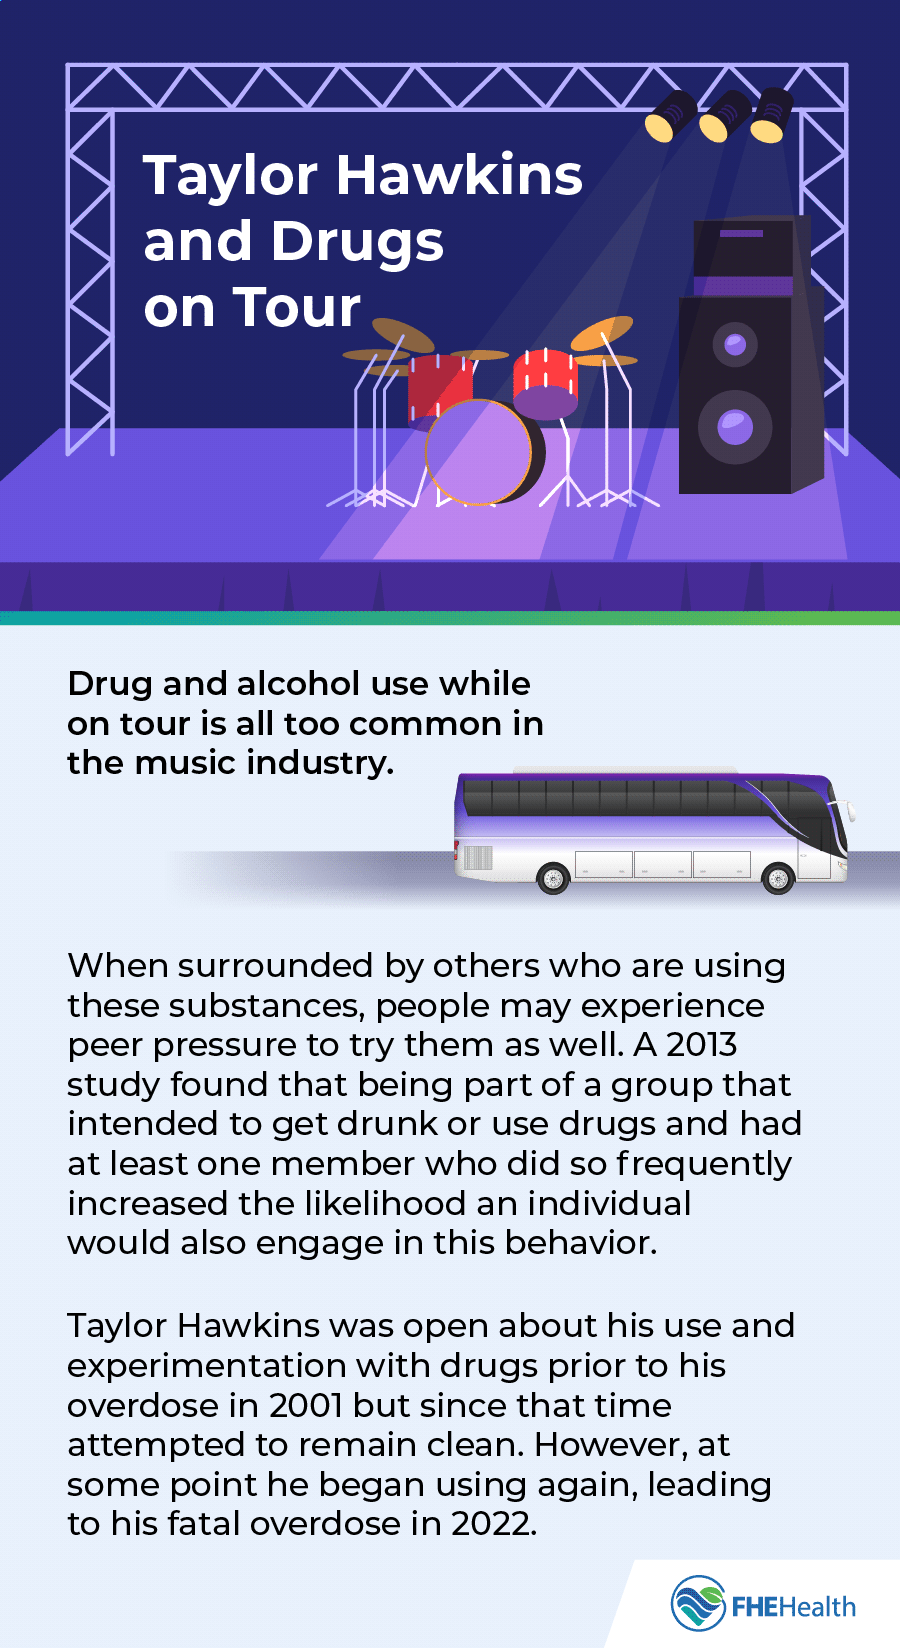 Drug and alcohol use while on tour is all too common in the music industry